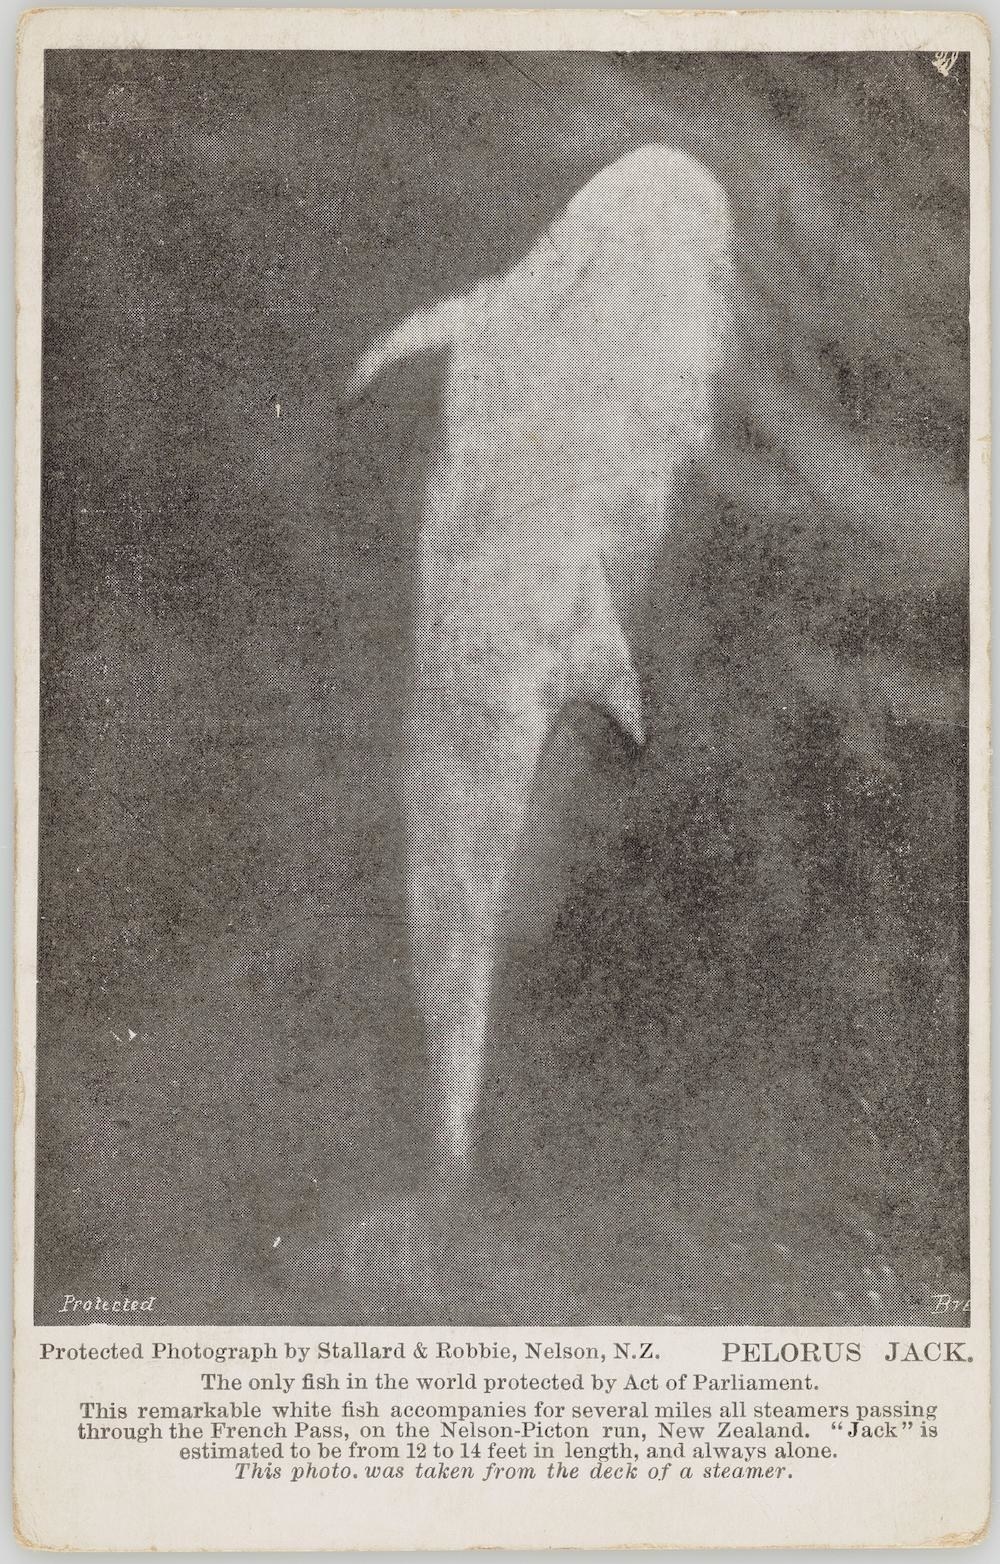 Pelorus Jack dolphin in a news clipping